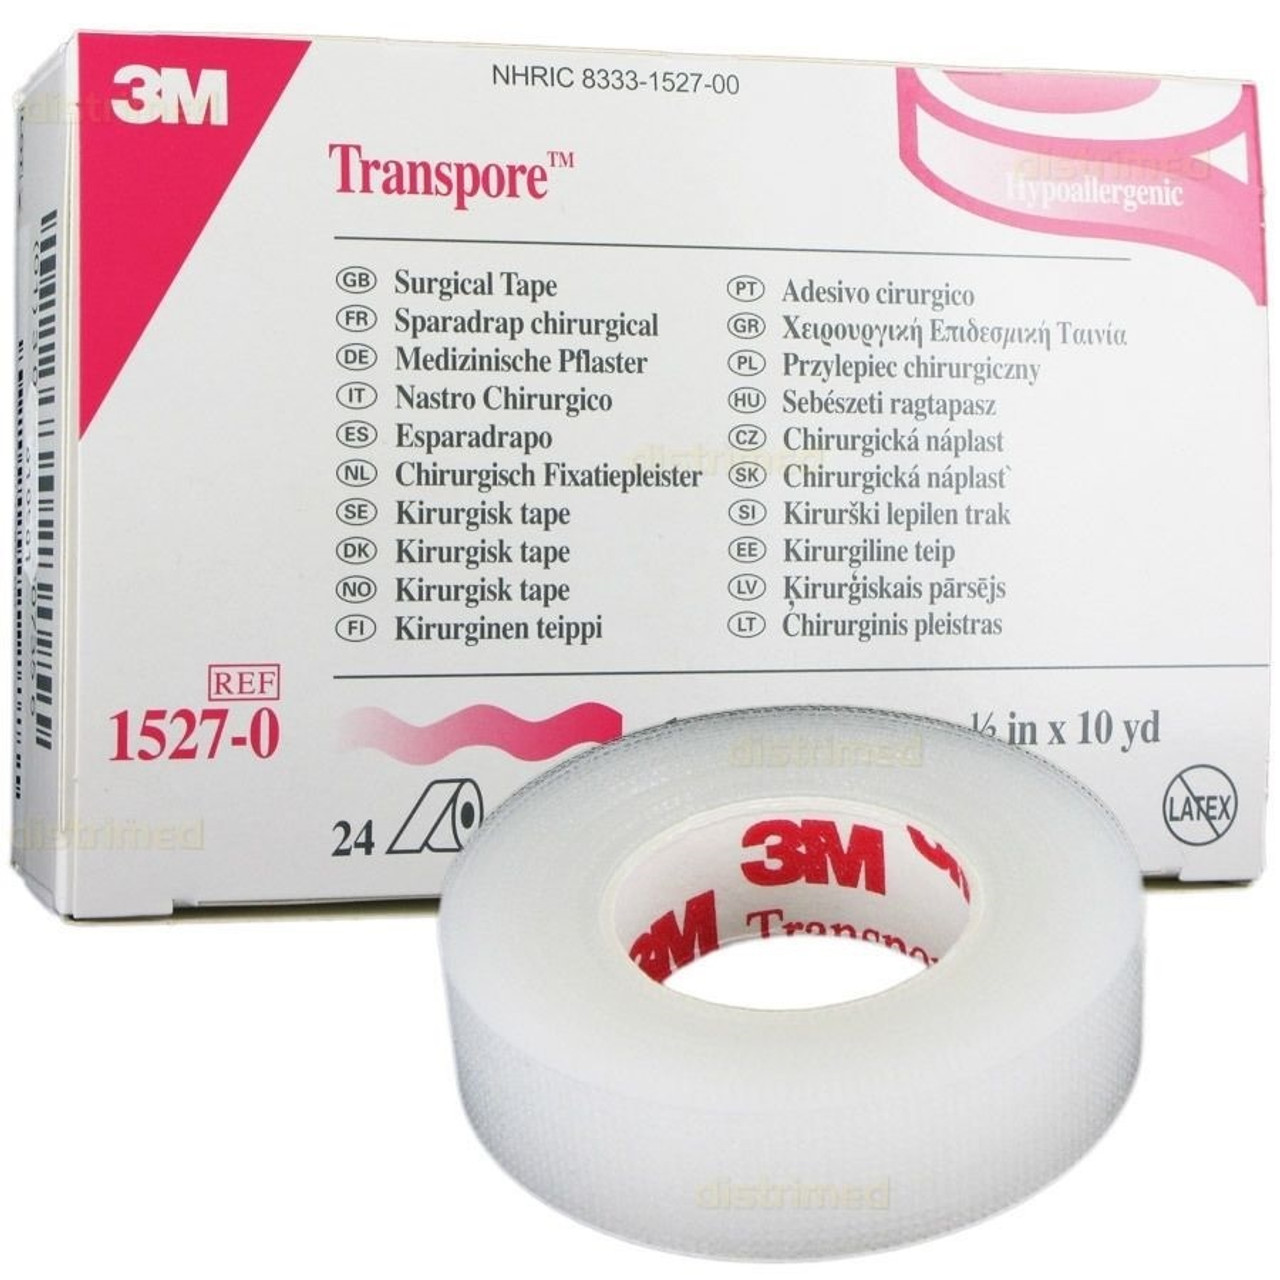 3M Transpore Surgical Tape 1527-3, 3 inch x 10 Yard - 4 Rolls/Box